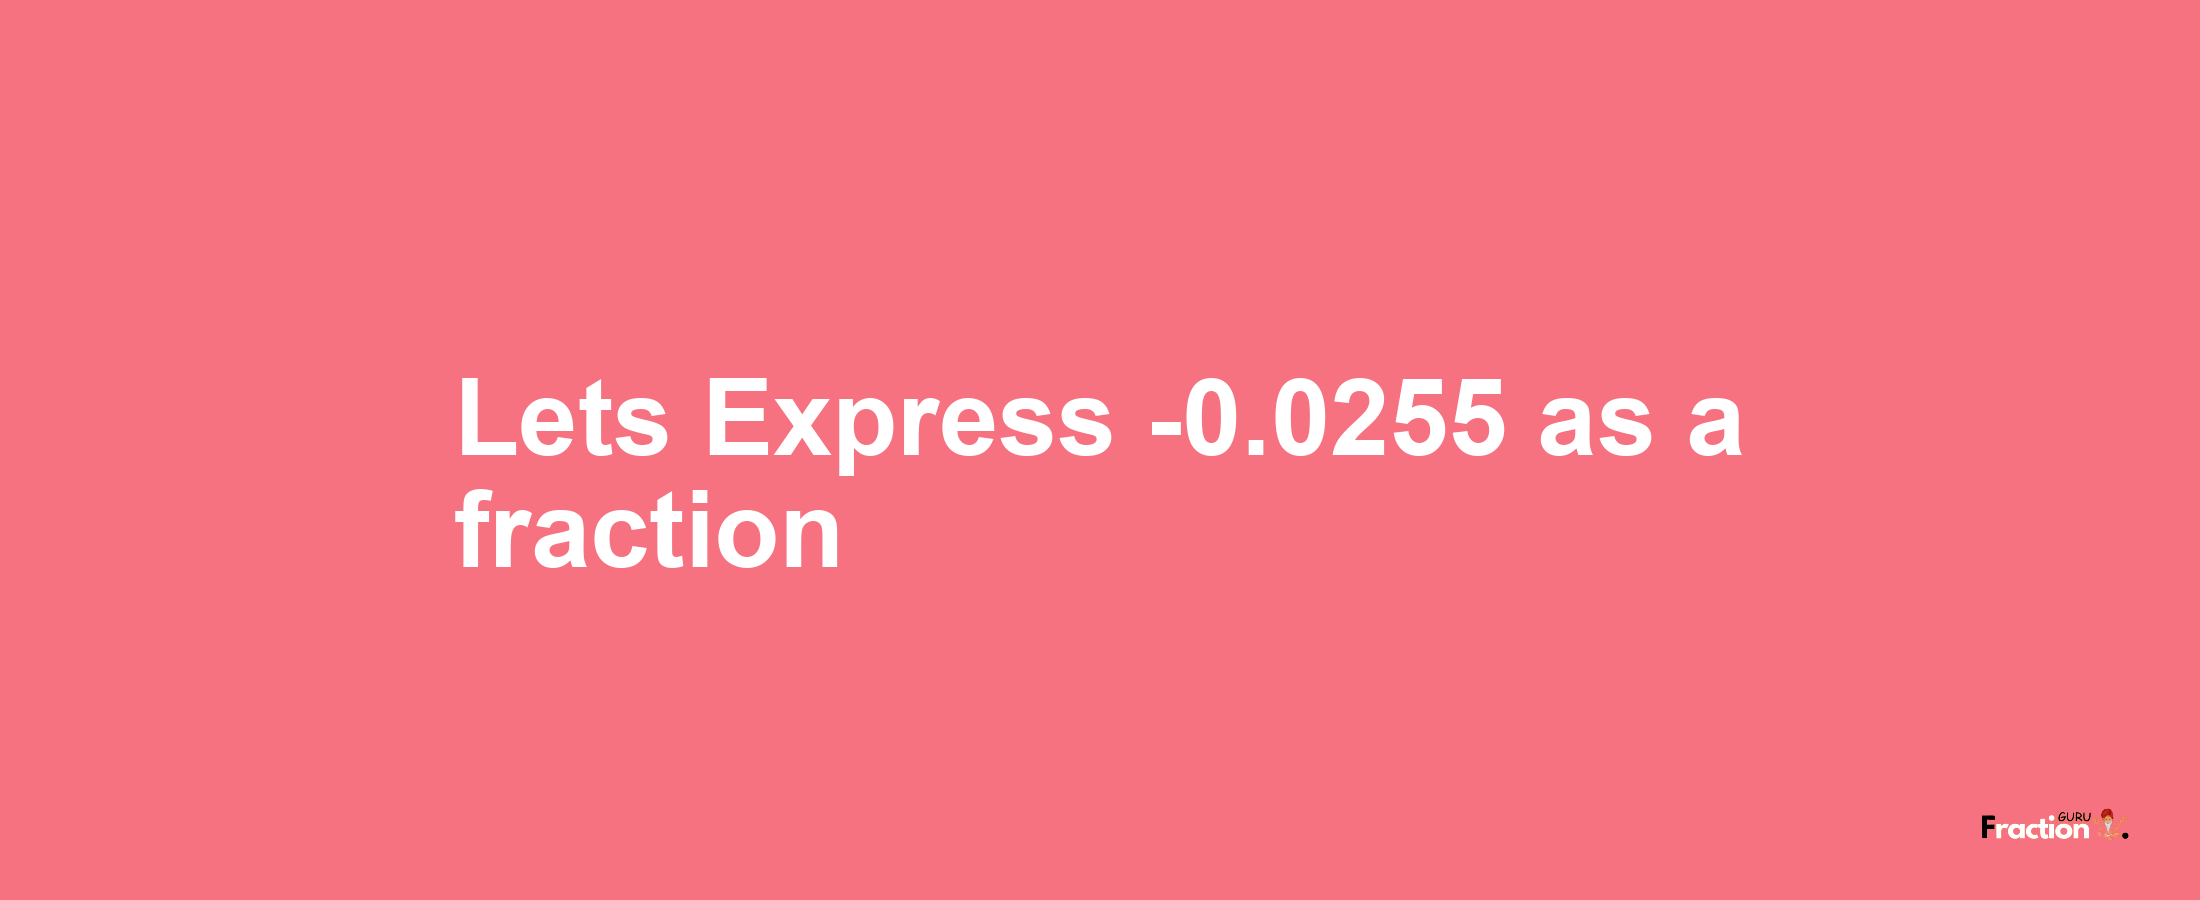 Lets Express -0.0255 as afraction